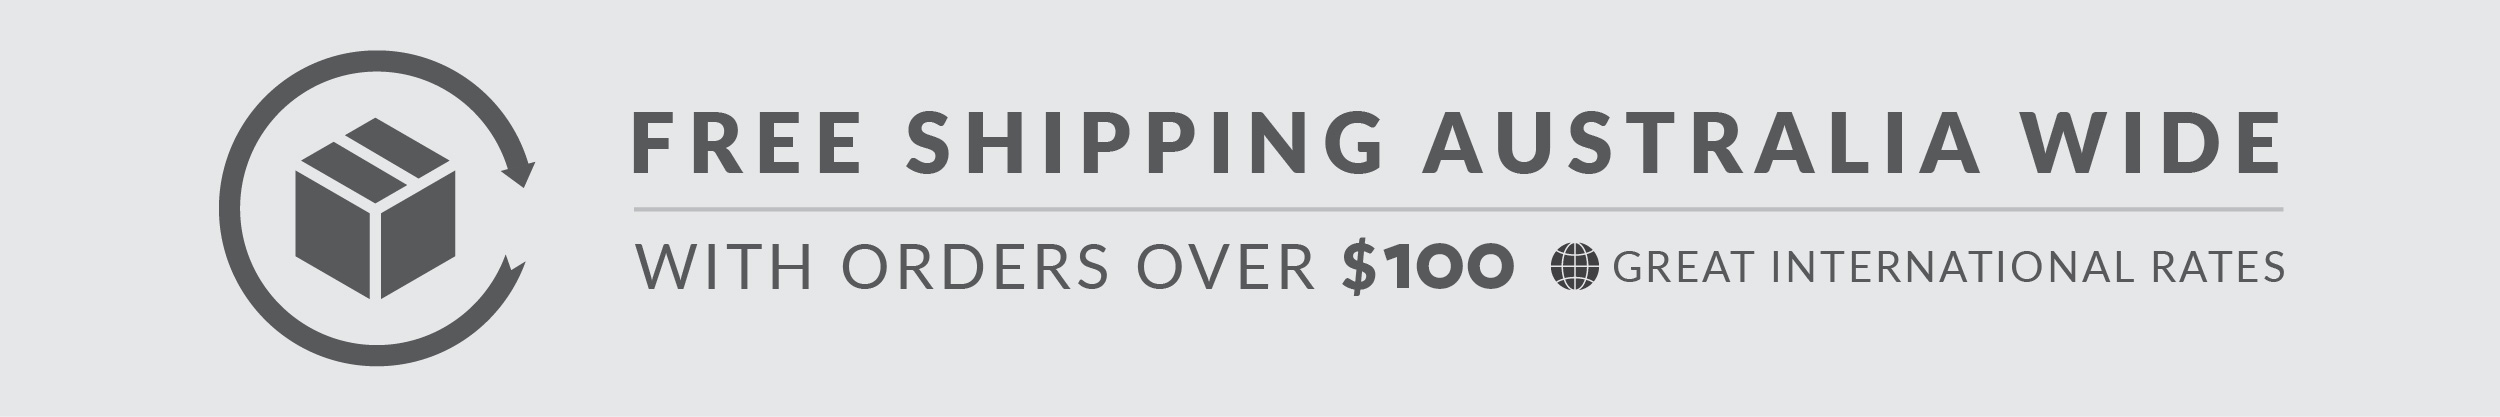 FREE-Shipping - update.png